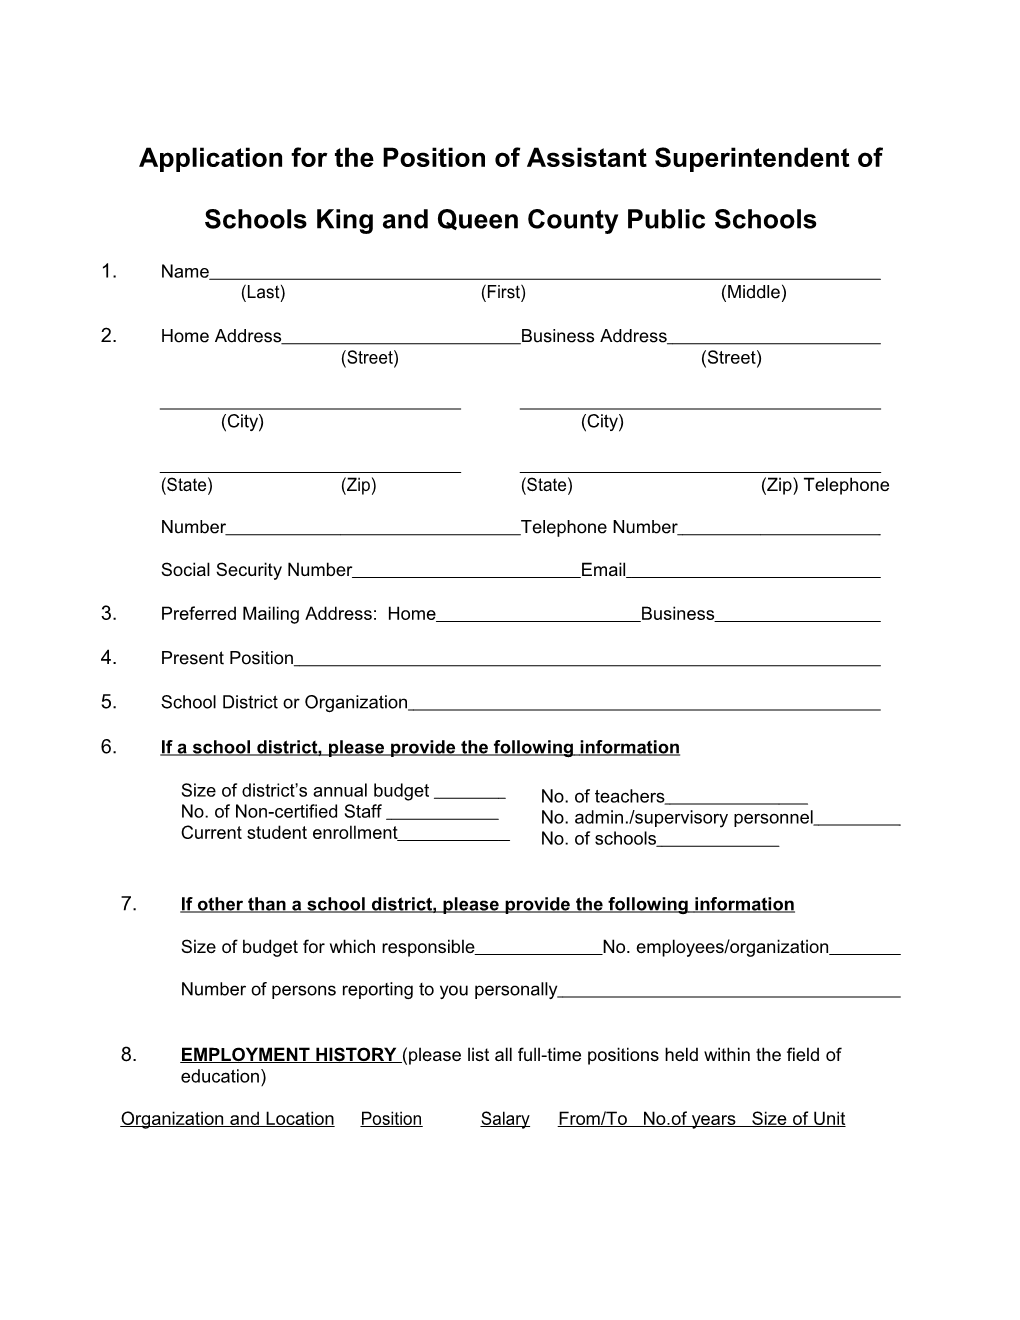 Application for the Position of Assistant Superintendent Ofschoolsking and Queen County